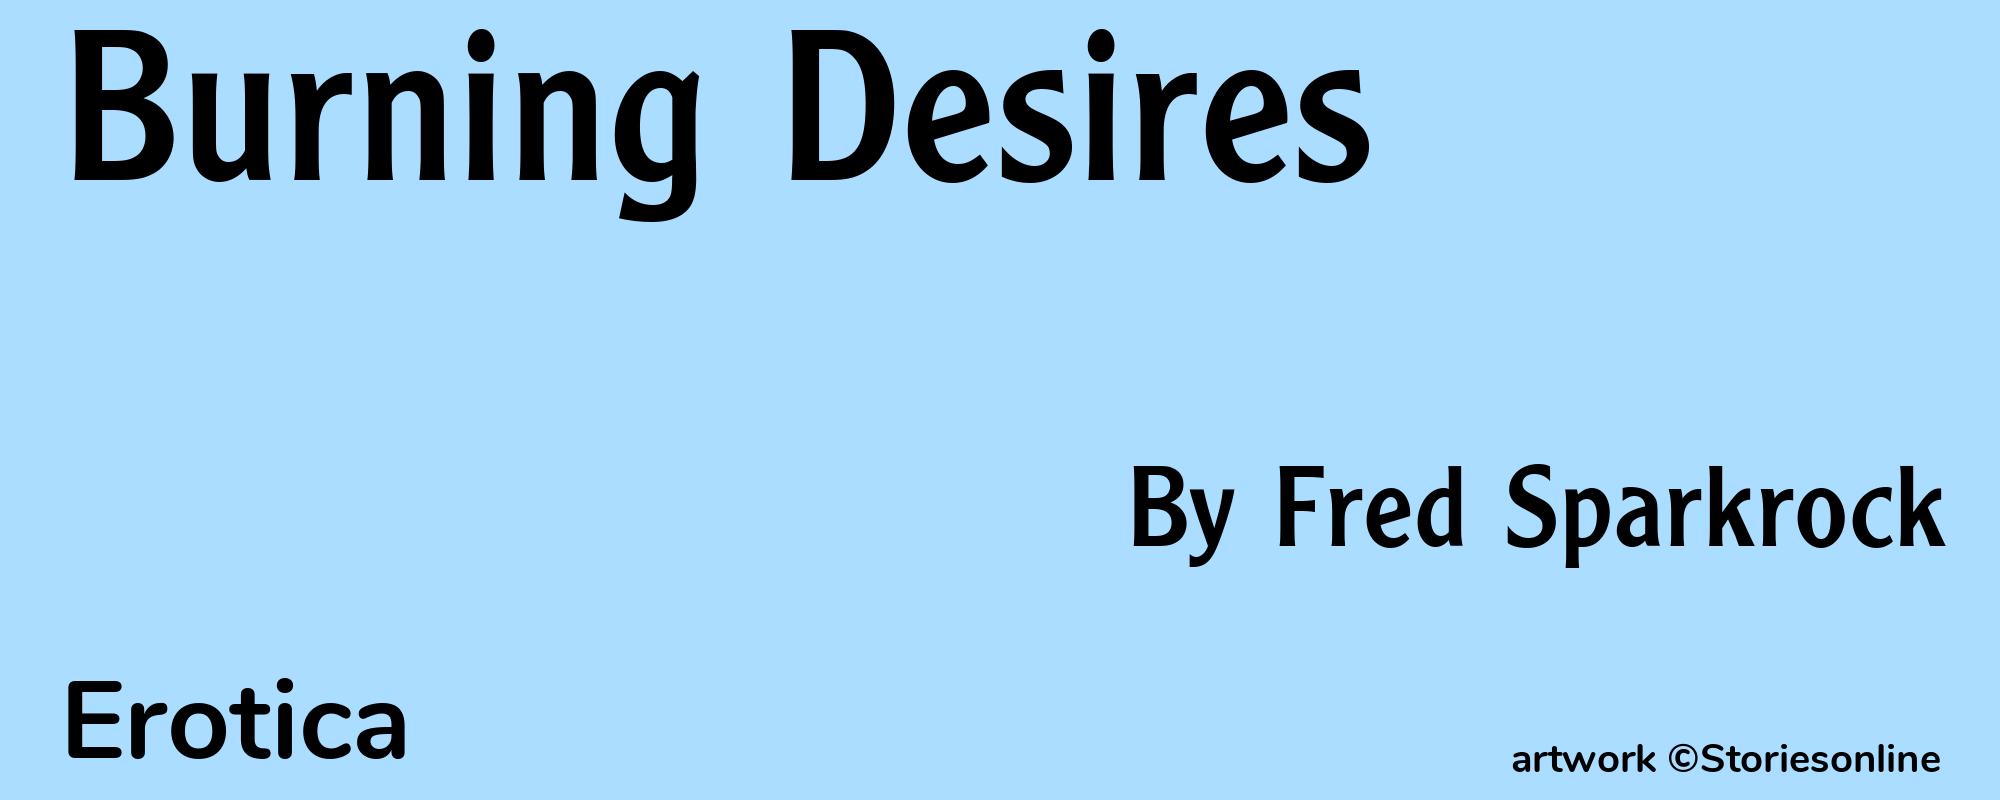 Burning Desires - Cover